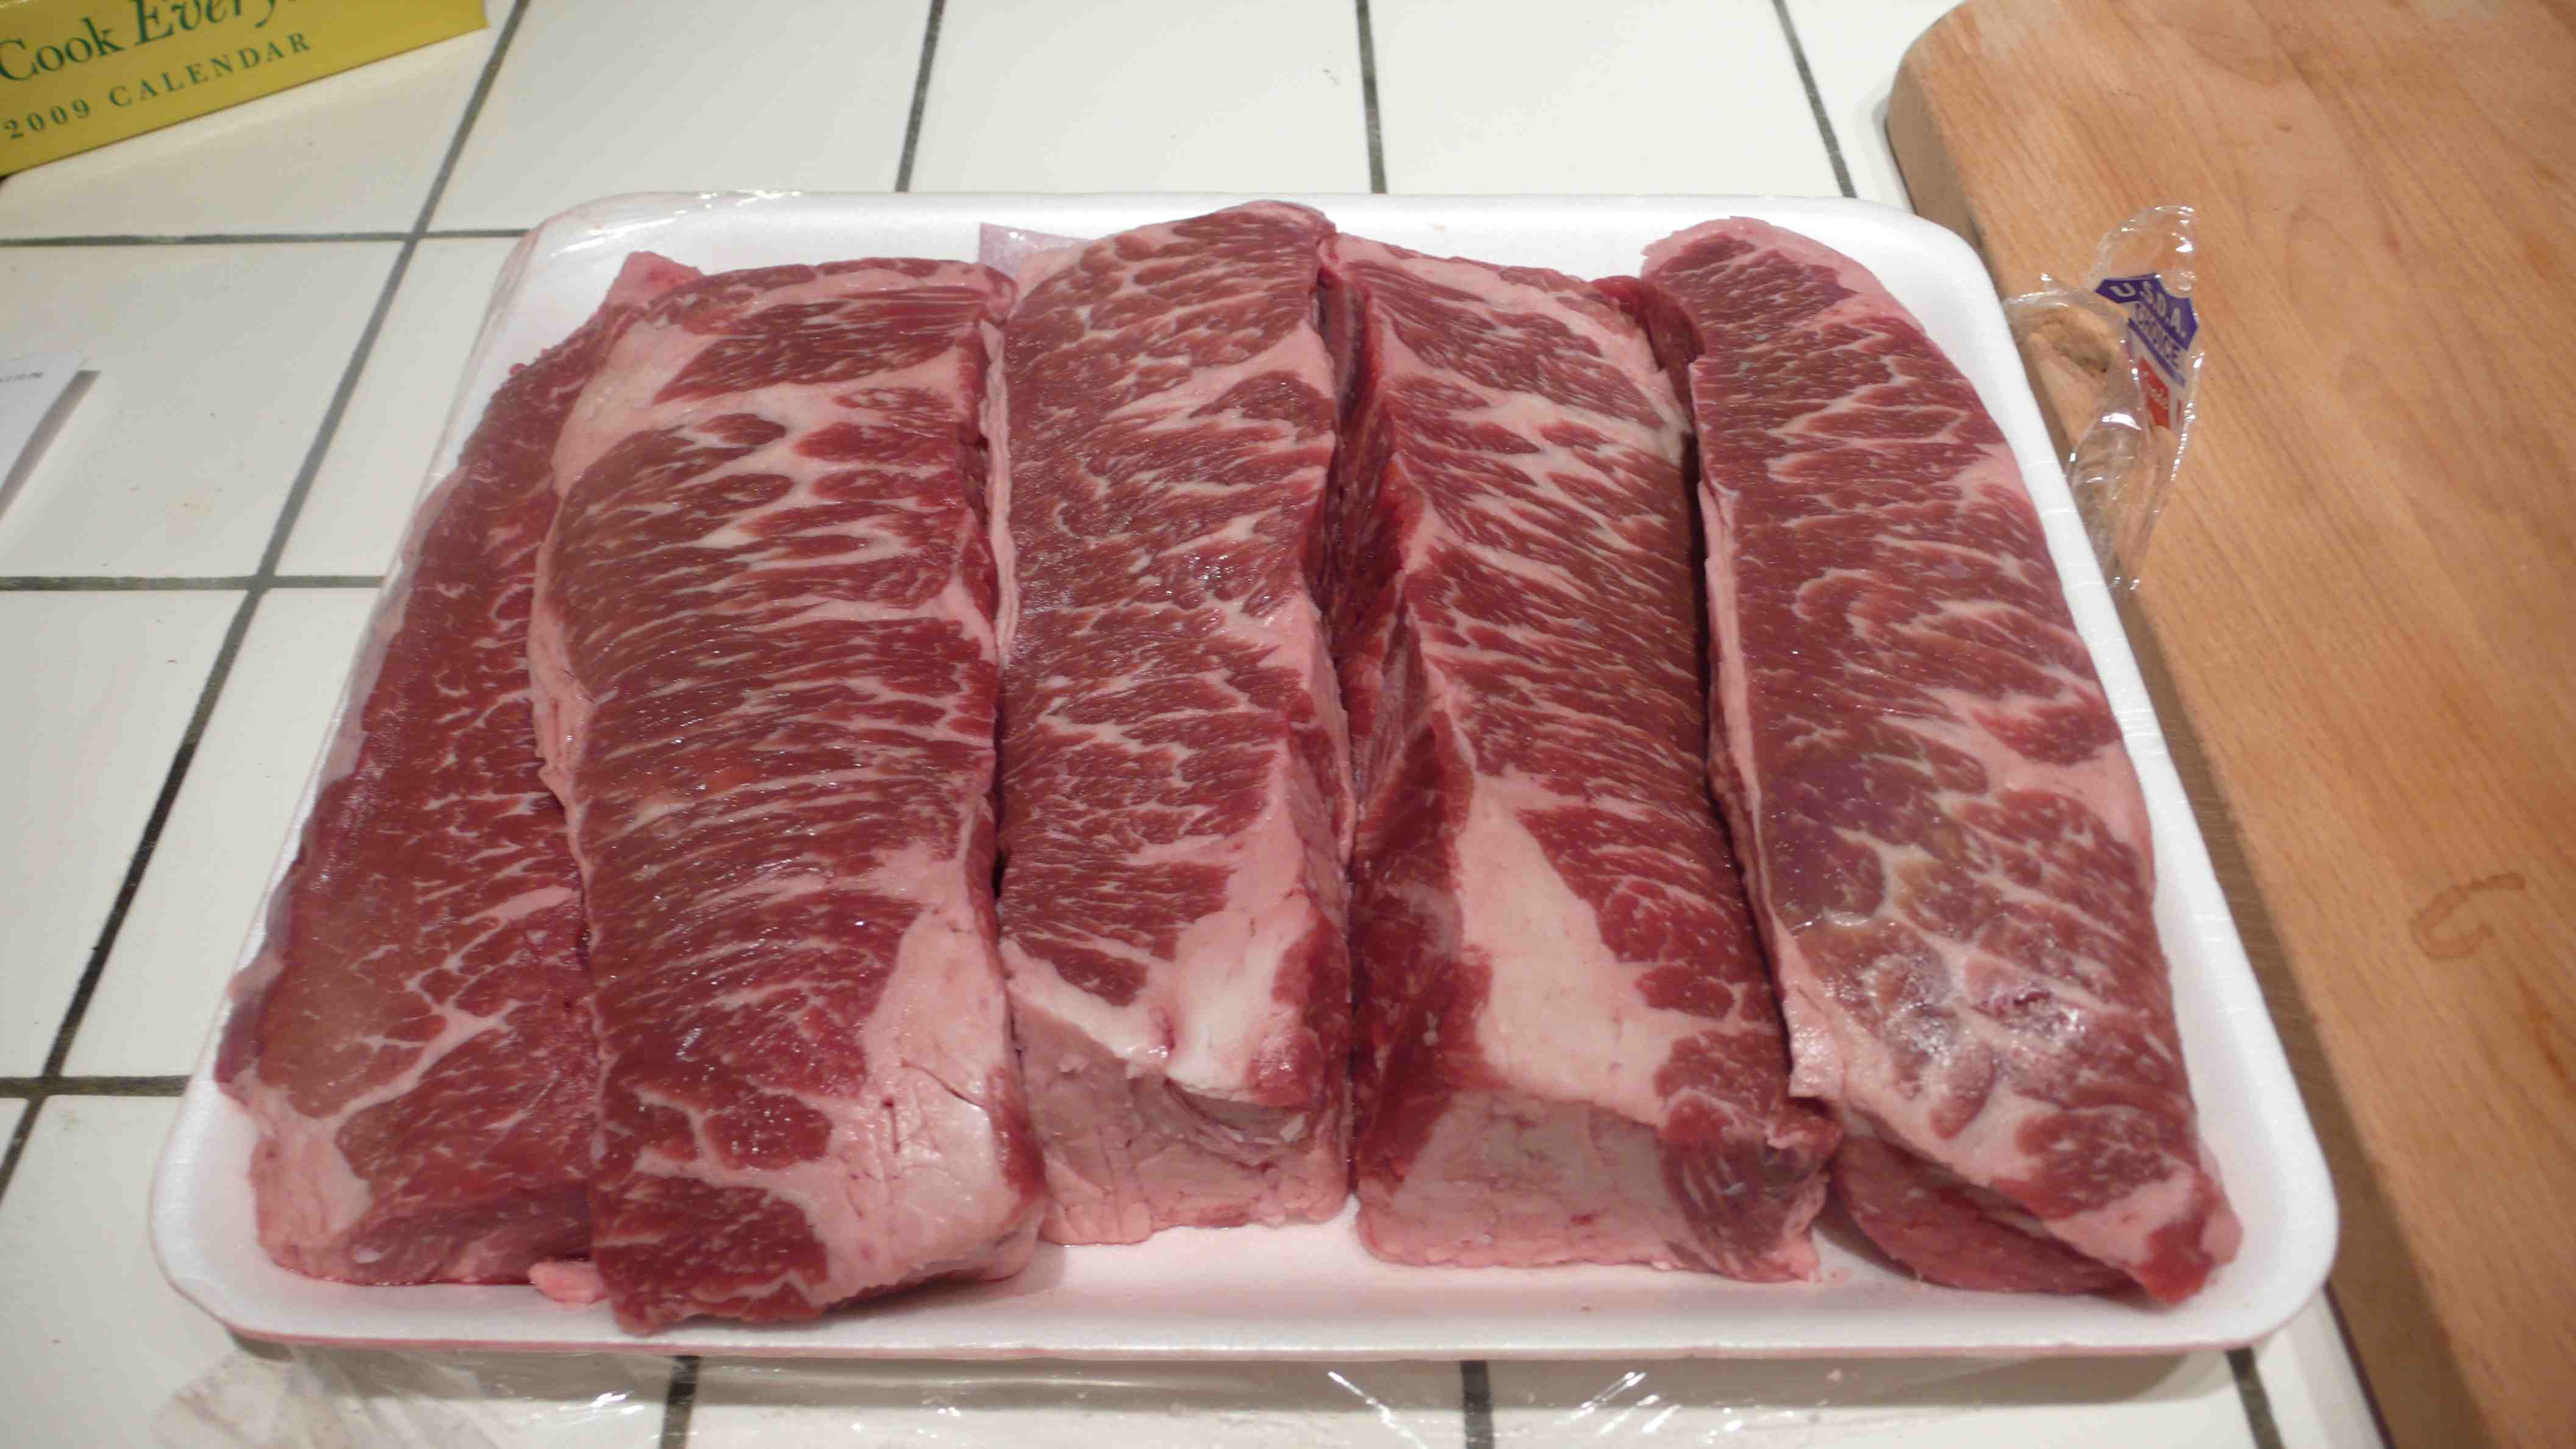 one 4 pound package of short rib meat from Costco